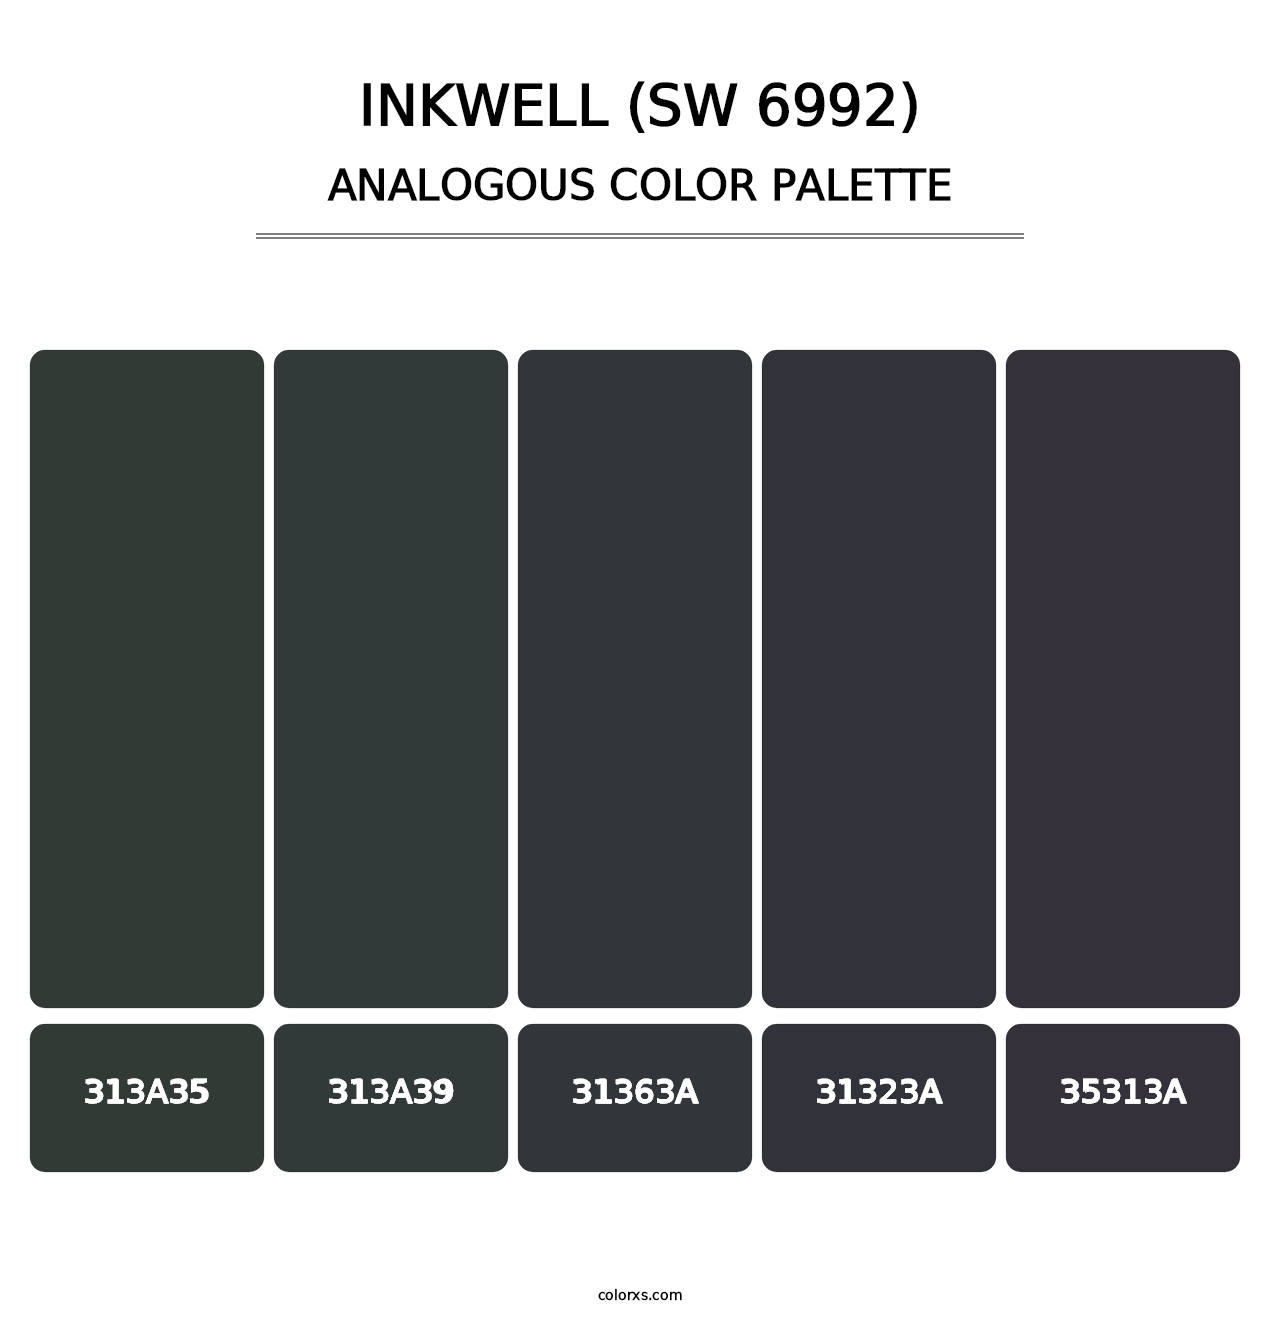 Inkwell (SW 6992) - Analogous Color Palette